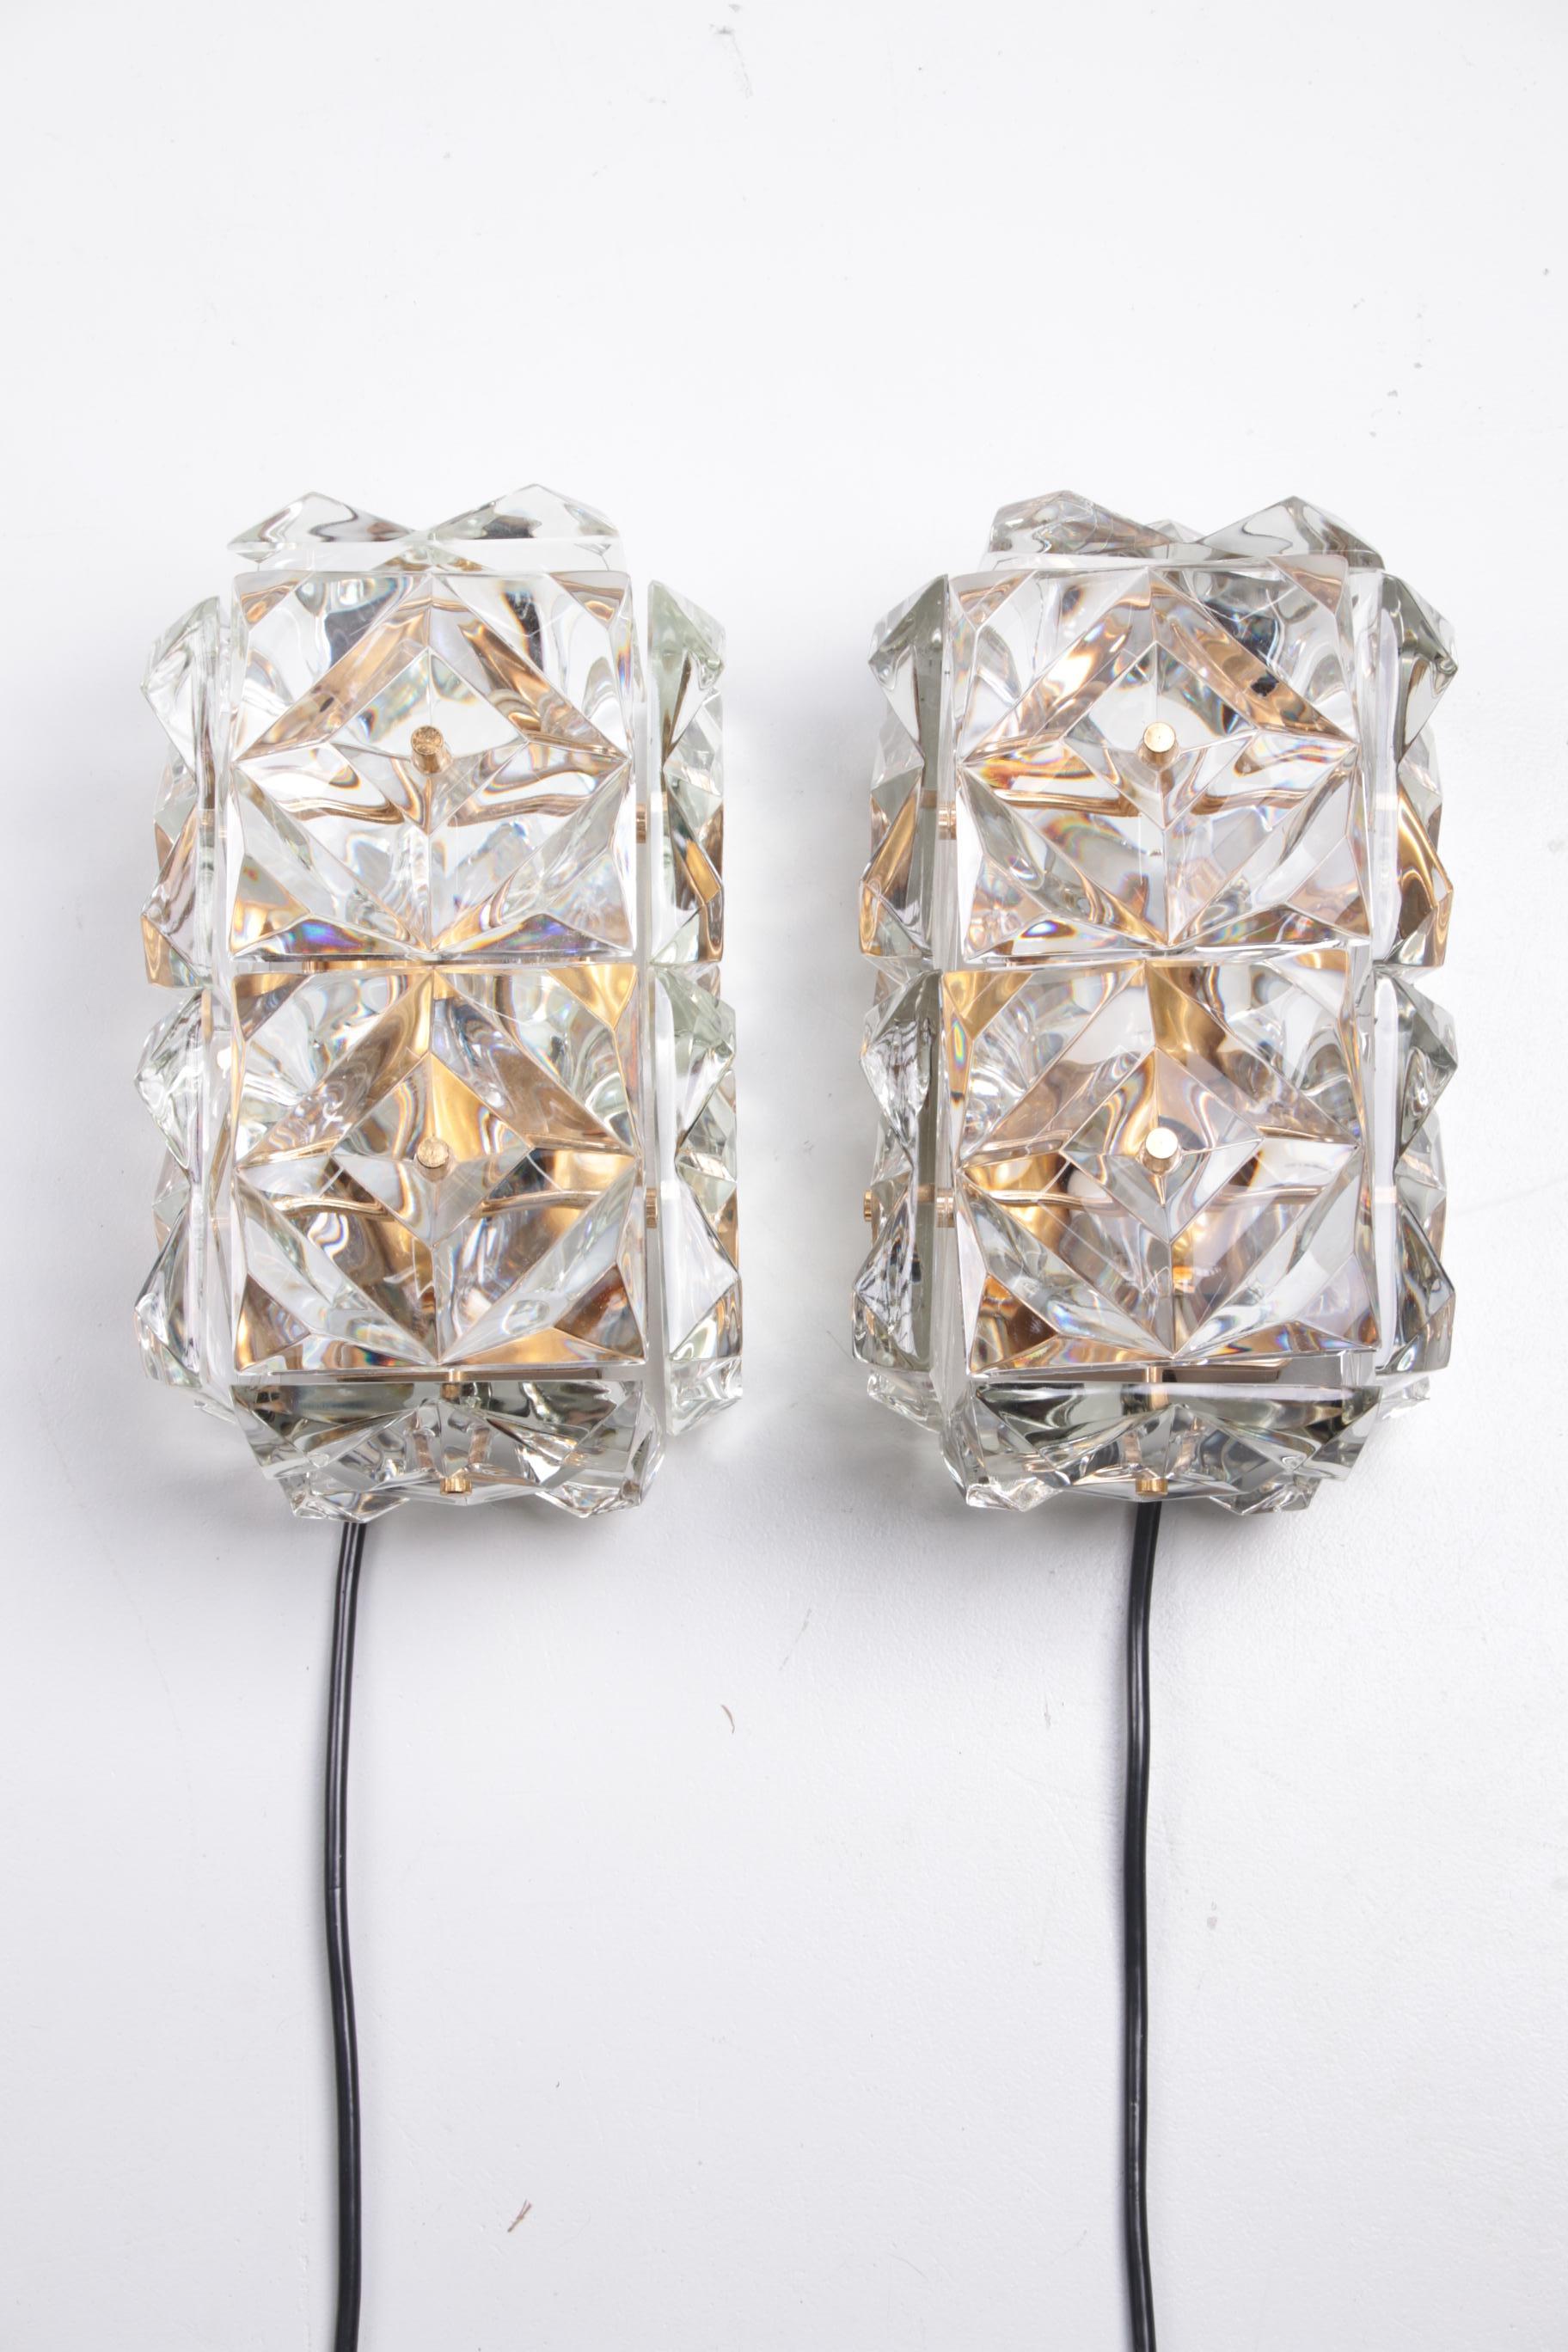 German Large Gold-Plated & Crystal Glass Flush Wall Mount Light from Kinkeldey, 1970s For Sale